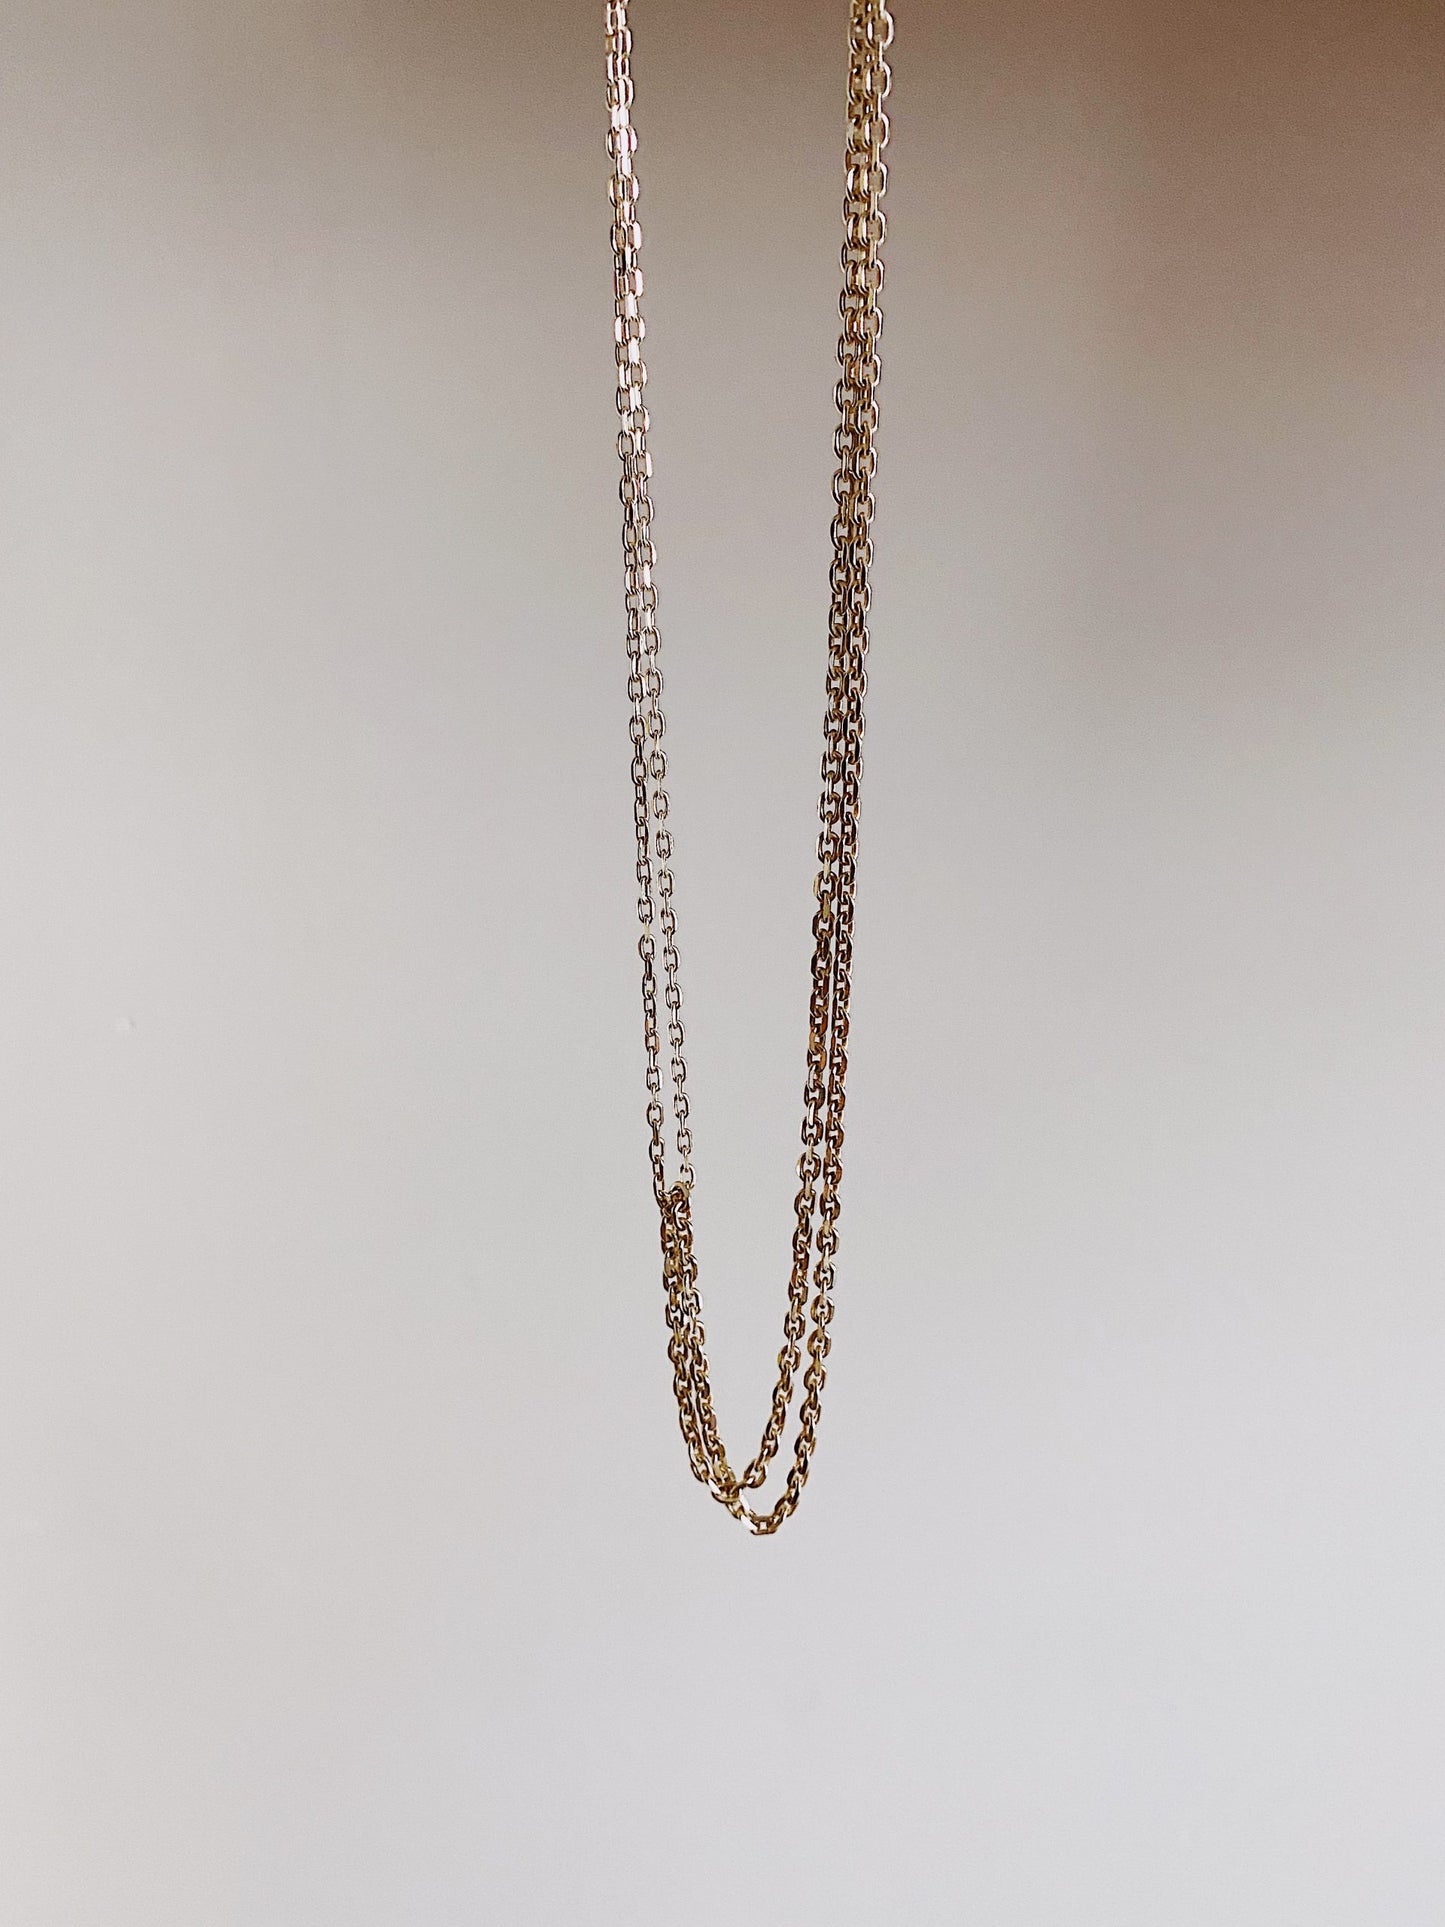 The Flic Flac Necklace